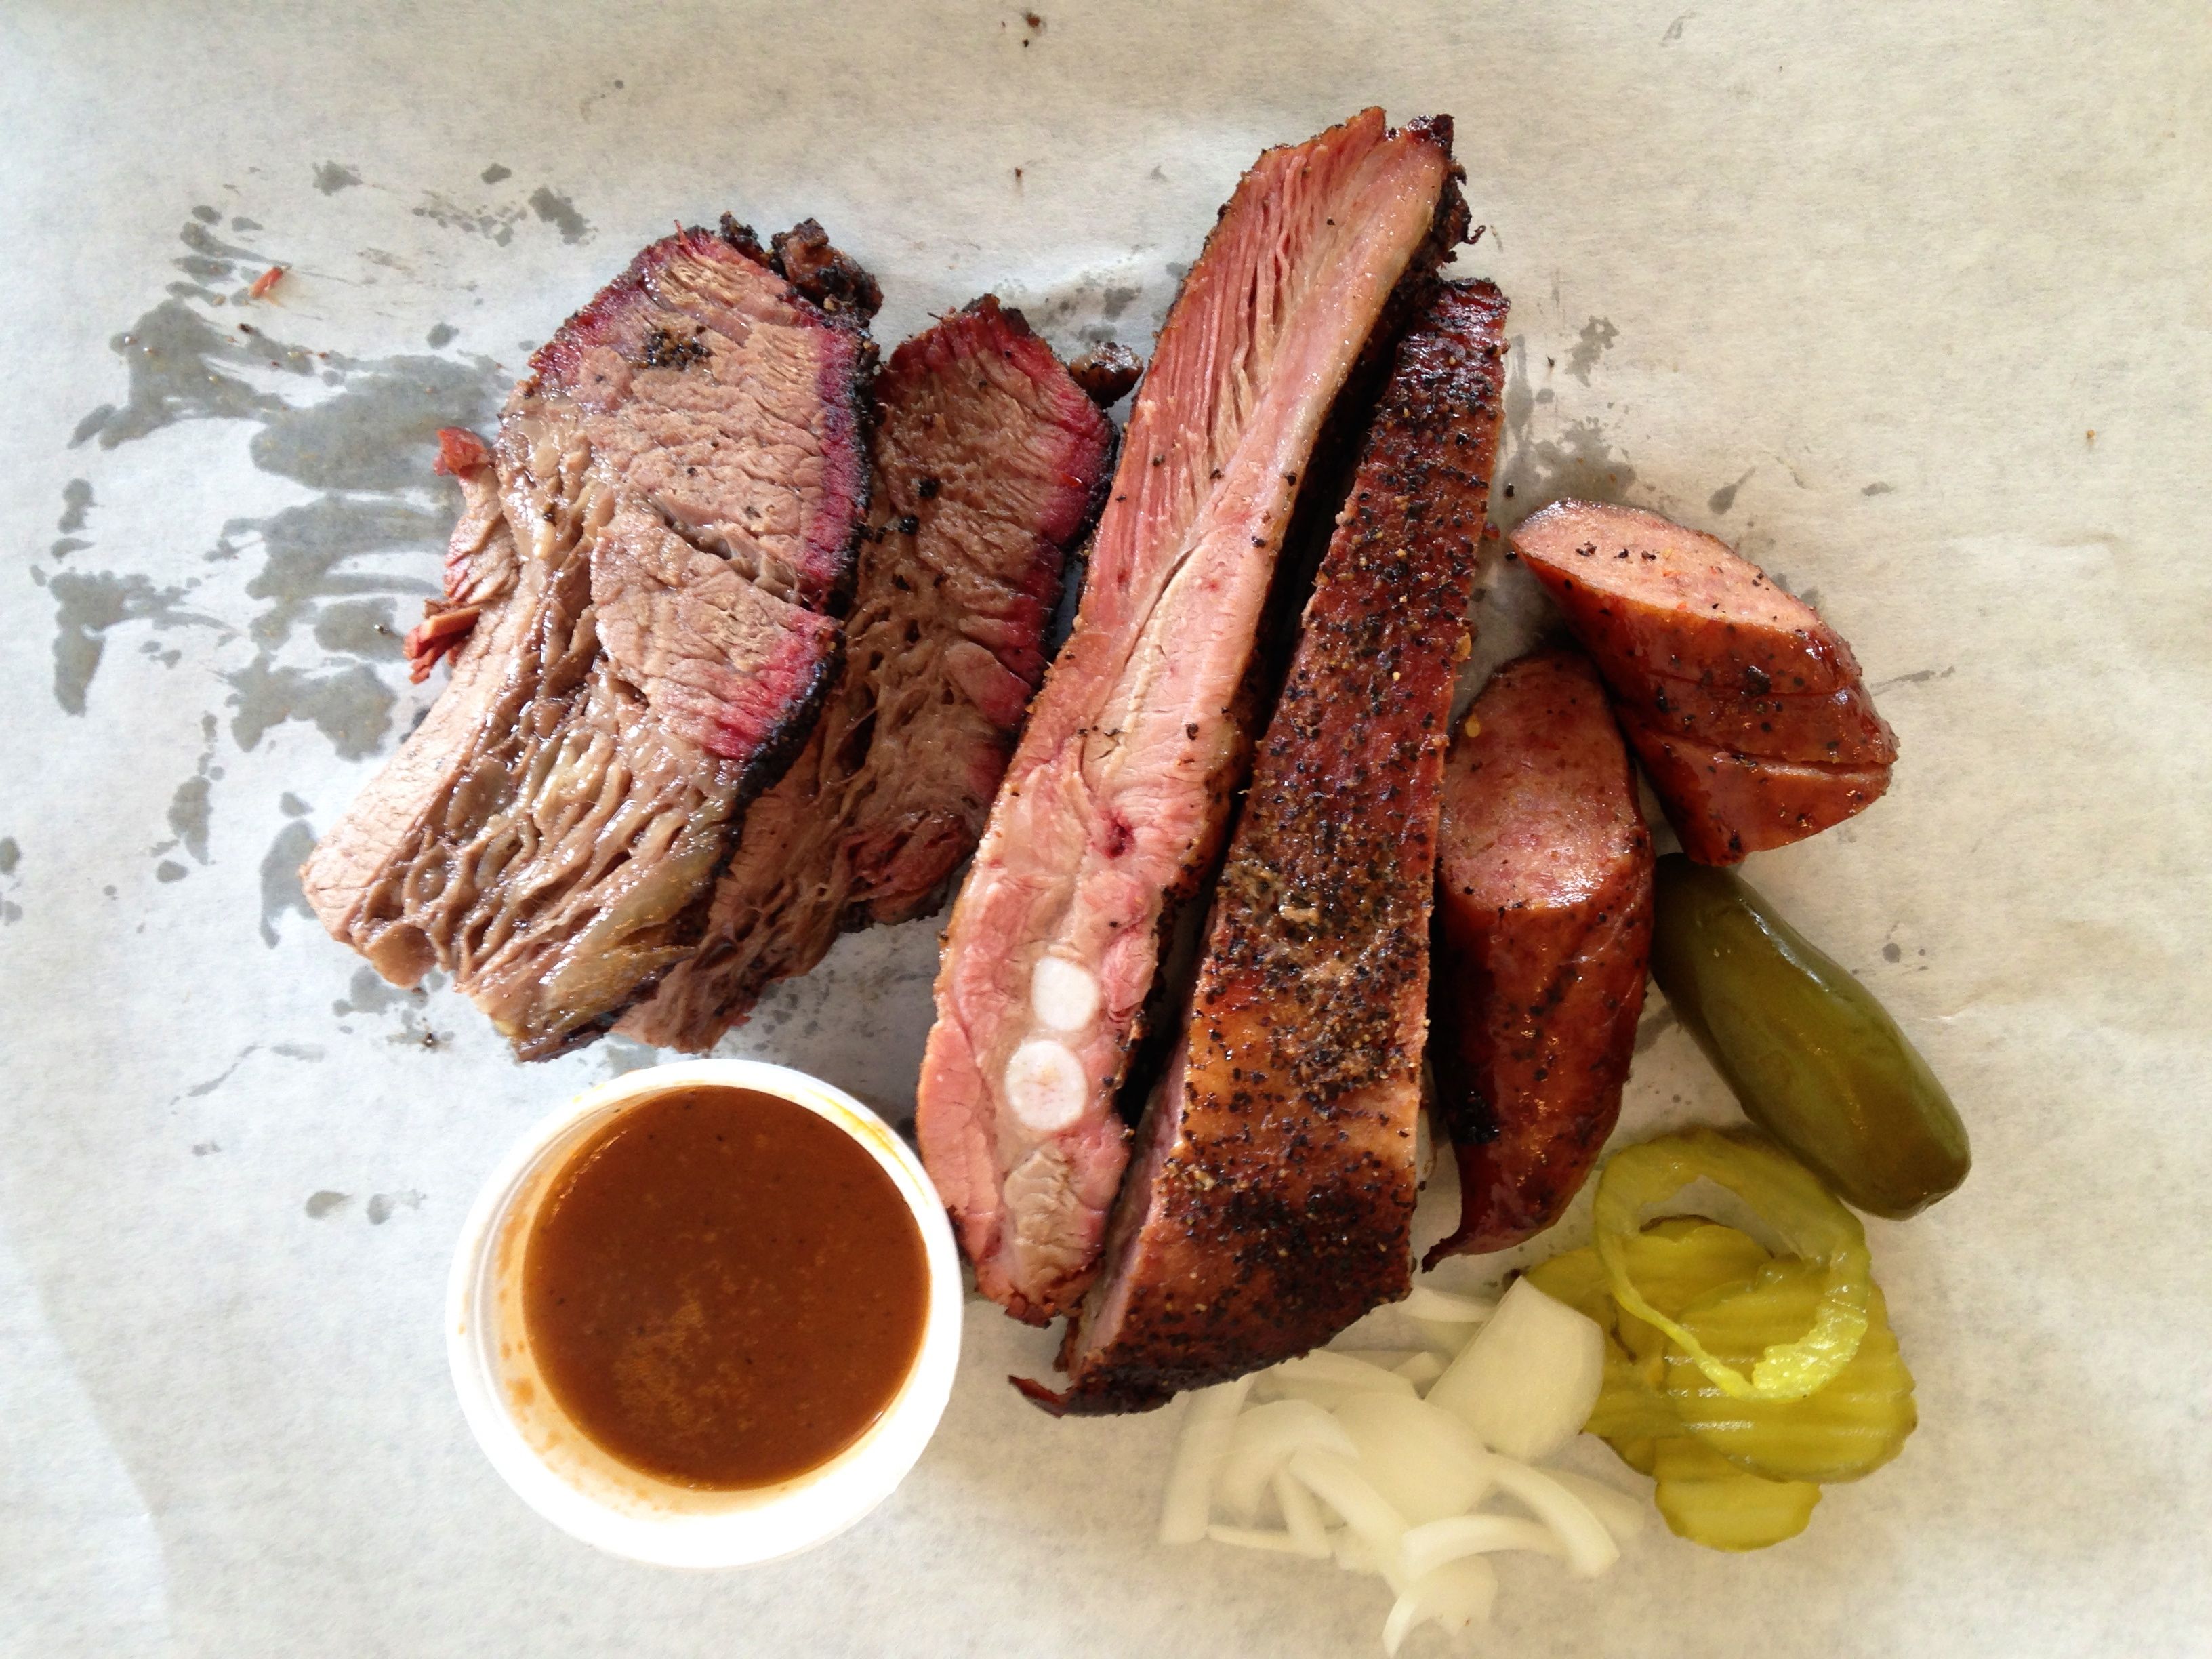 Central Texas, Is known for serving up huge amounts of brisket and ribs with a smoke over oak or pecan wood. The sauce isn't as important in Central Texas and is usually used as a side dipping sauce, putting all focus on the protein that is produced from the pits. Whereas East Texas, traditionally uses both part beef and pork that is chopped finely and placed on sandwiches typically, and drenched and a  sweet tomato and brown sugar based sauce, and this style BBQ can be found throughout the Gulf Coast ranging from Louisiana all the way to Georgia.